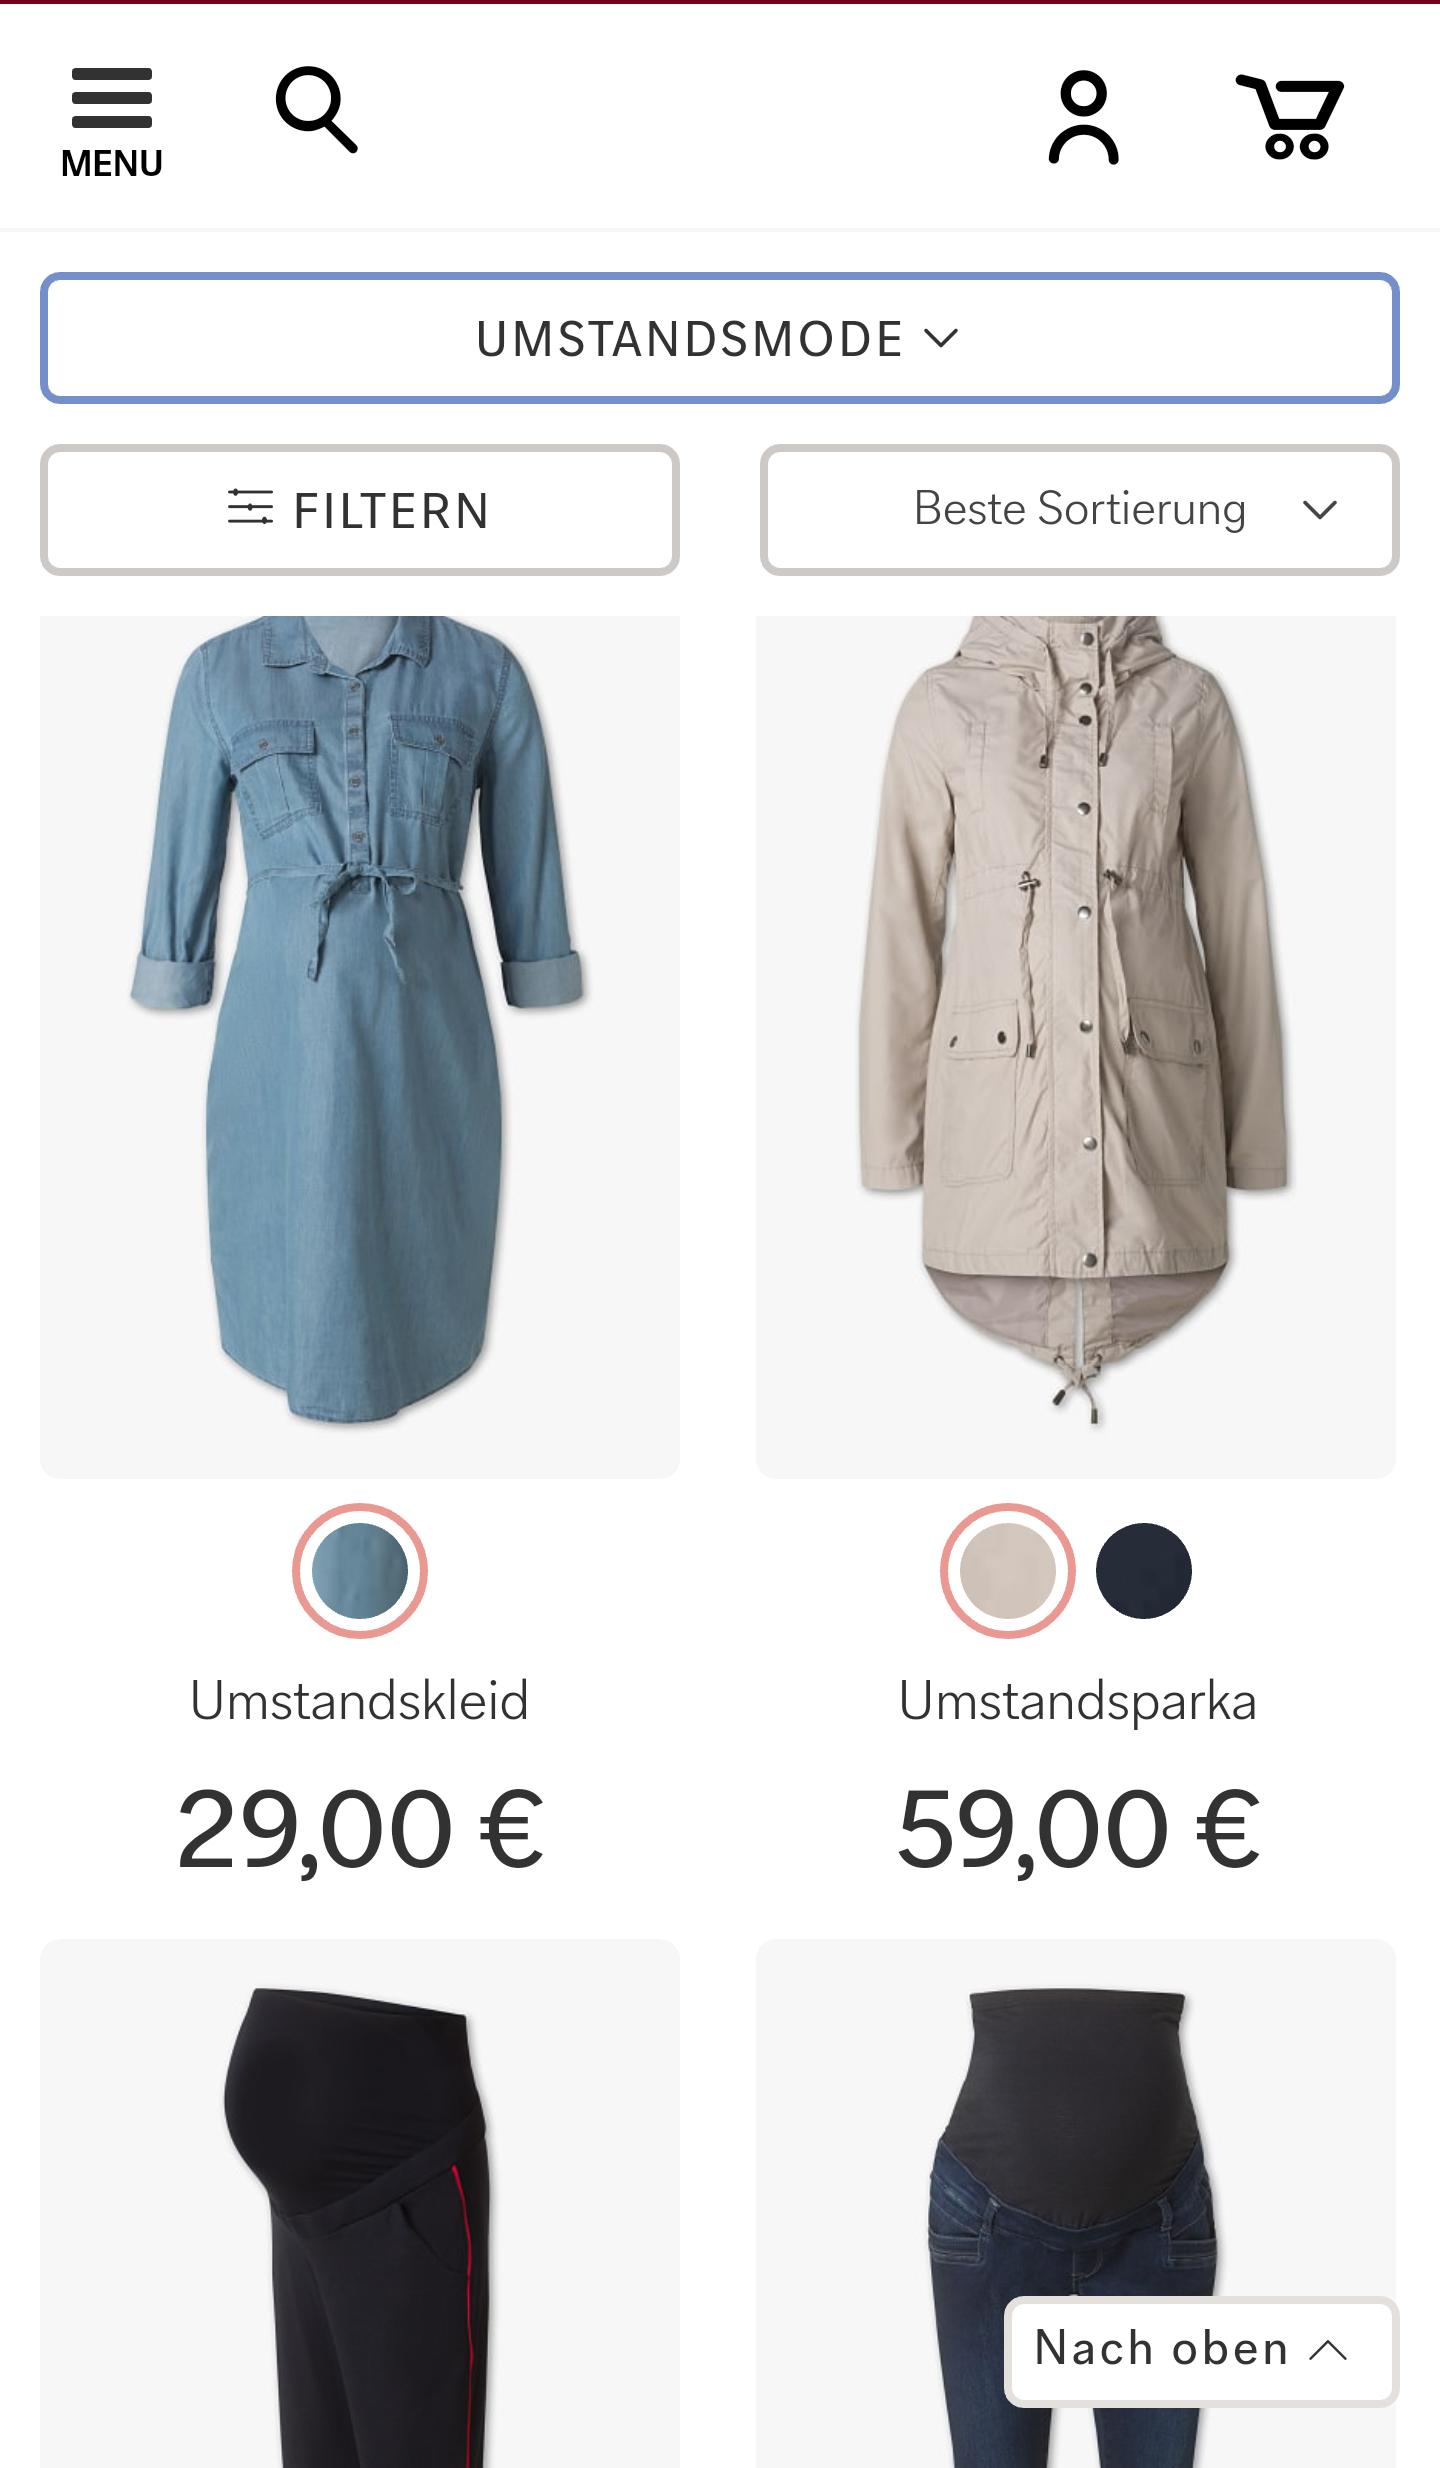 c und a online shop - cunda for Android - APK Download